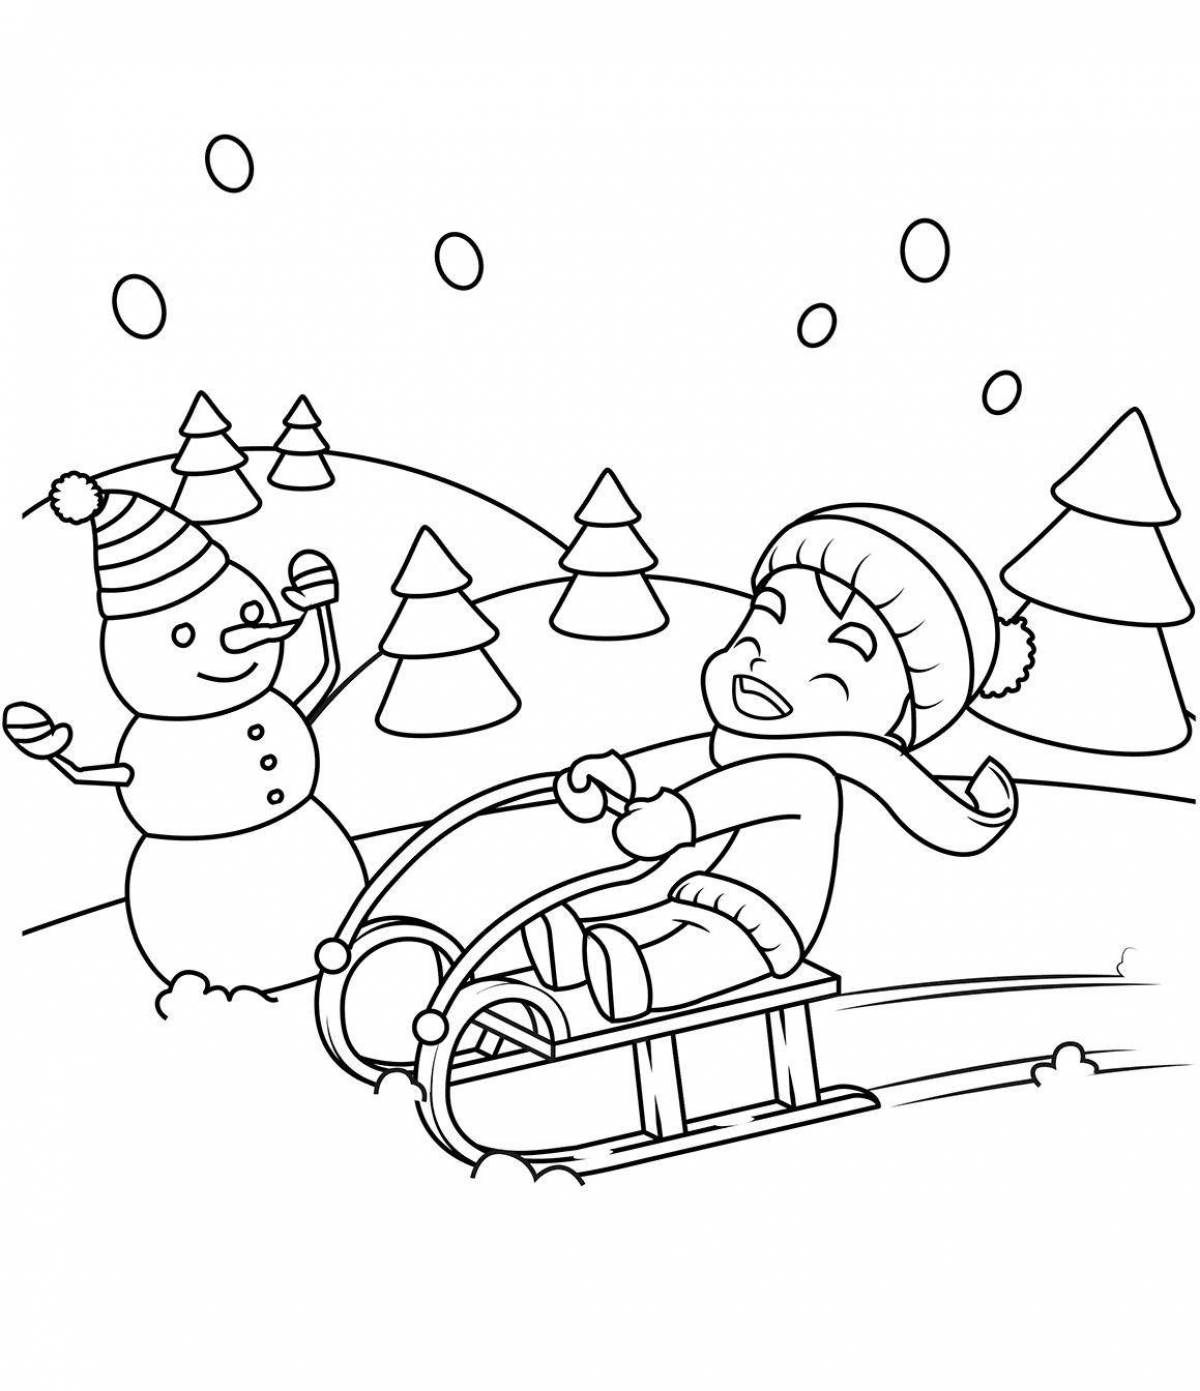 Coloring sleigh for kids